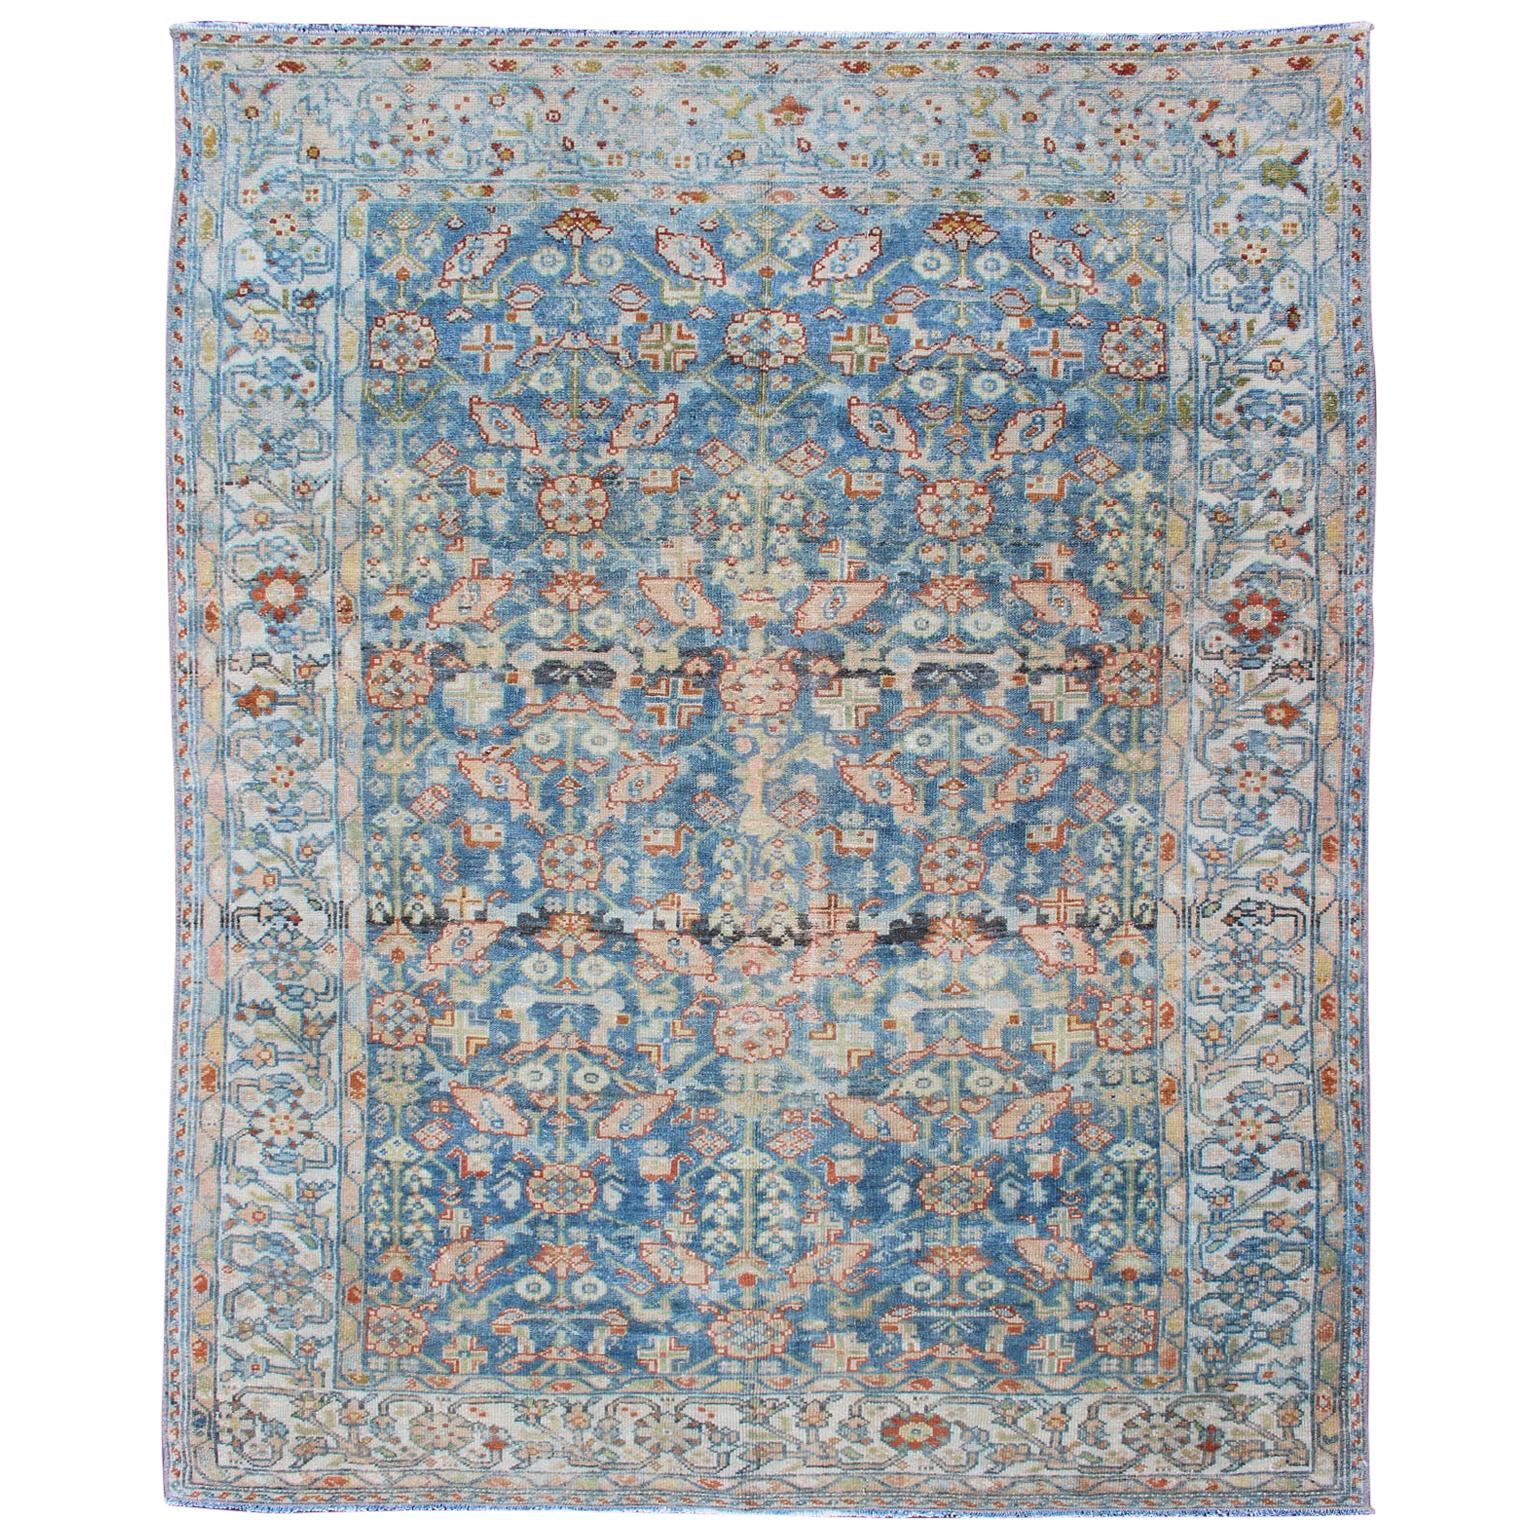 Persian Antique Malayer Rug with All-Over Design in Various Blue, Ivory & Red